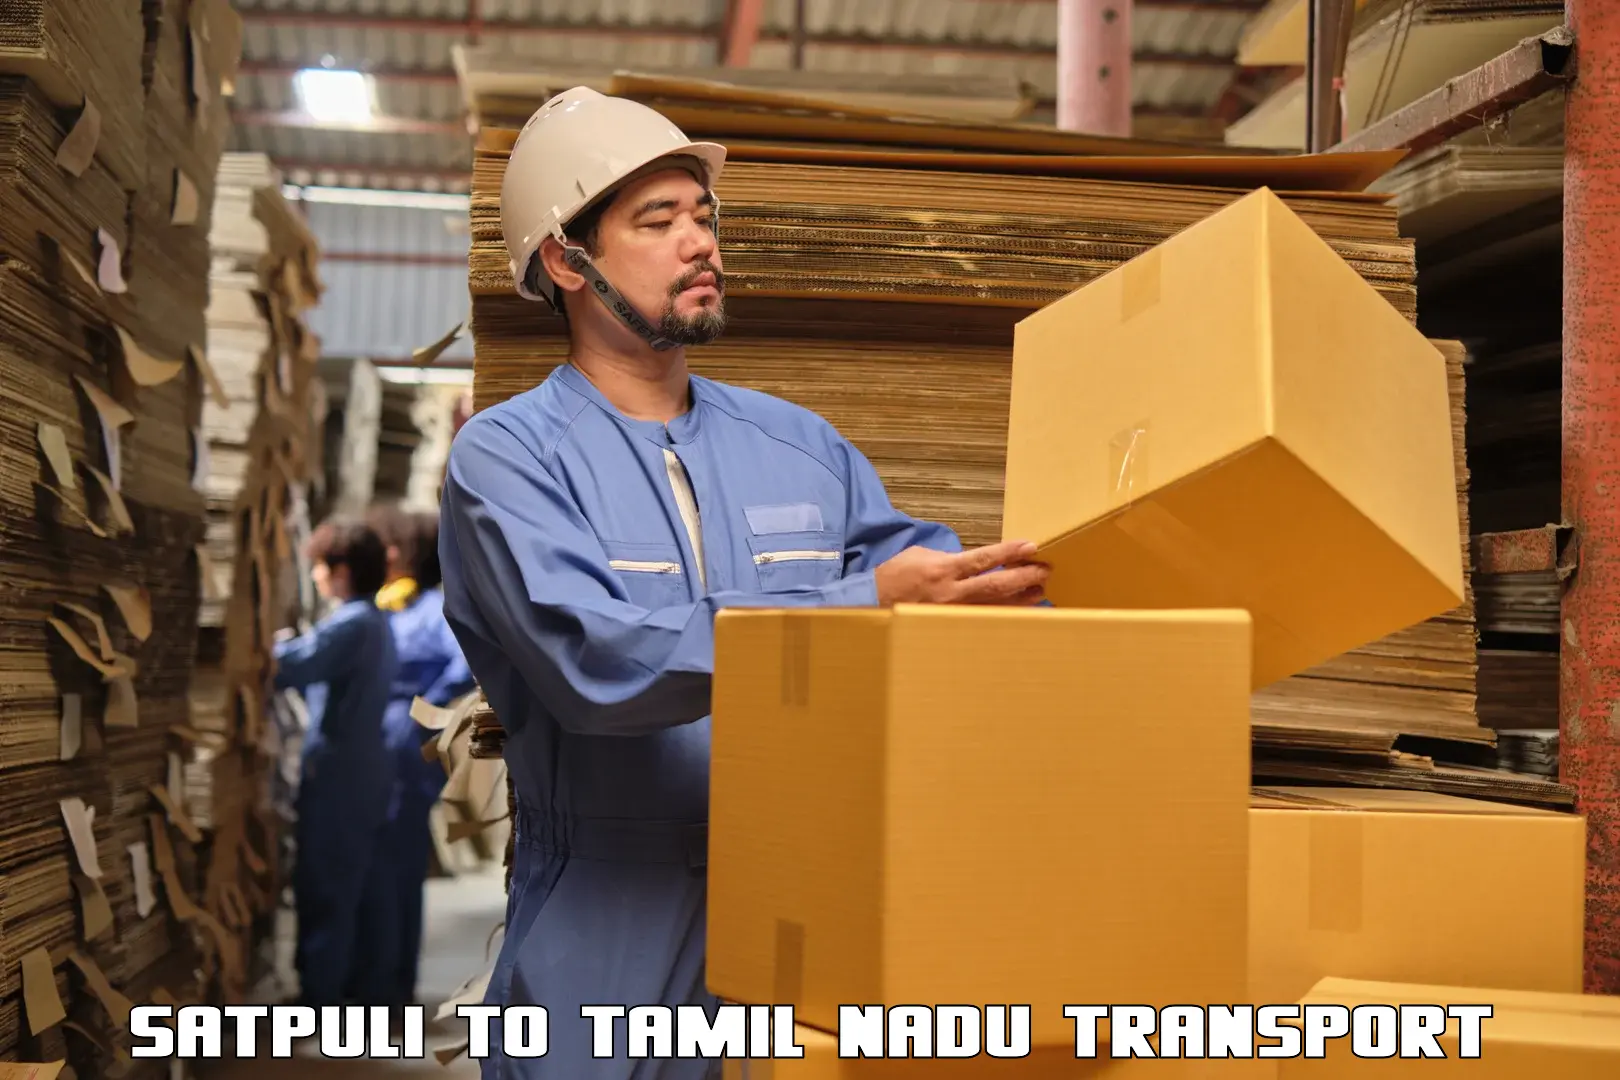 Container transport service Satpuli to Trichy